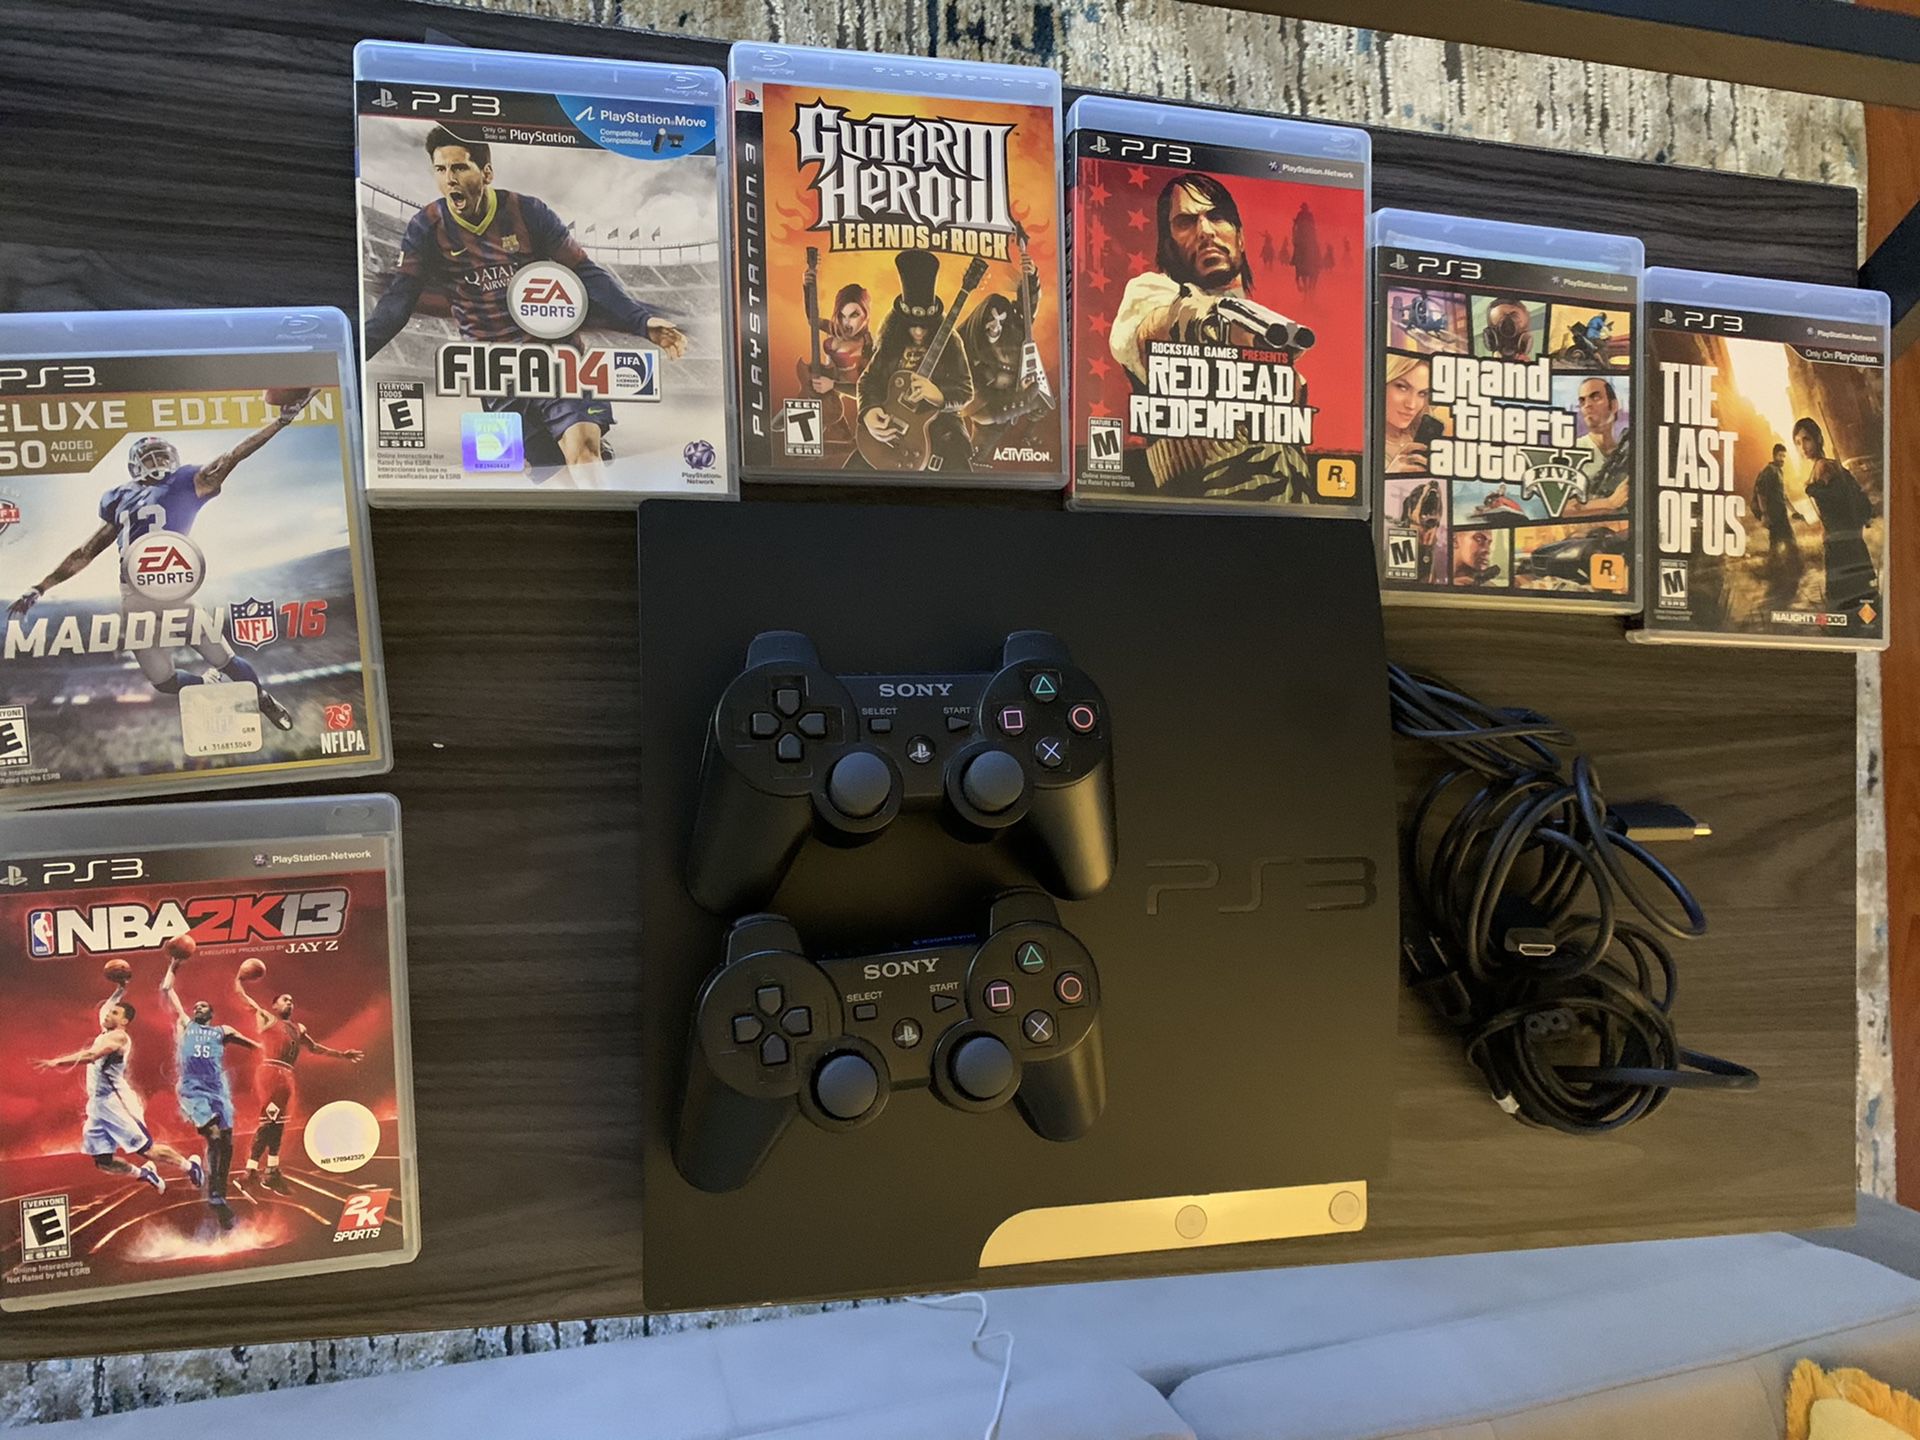 PS3 with 2 Wireless controllers and Games